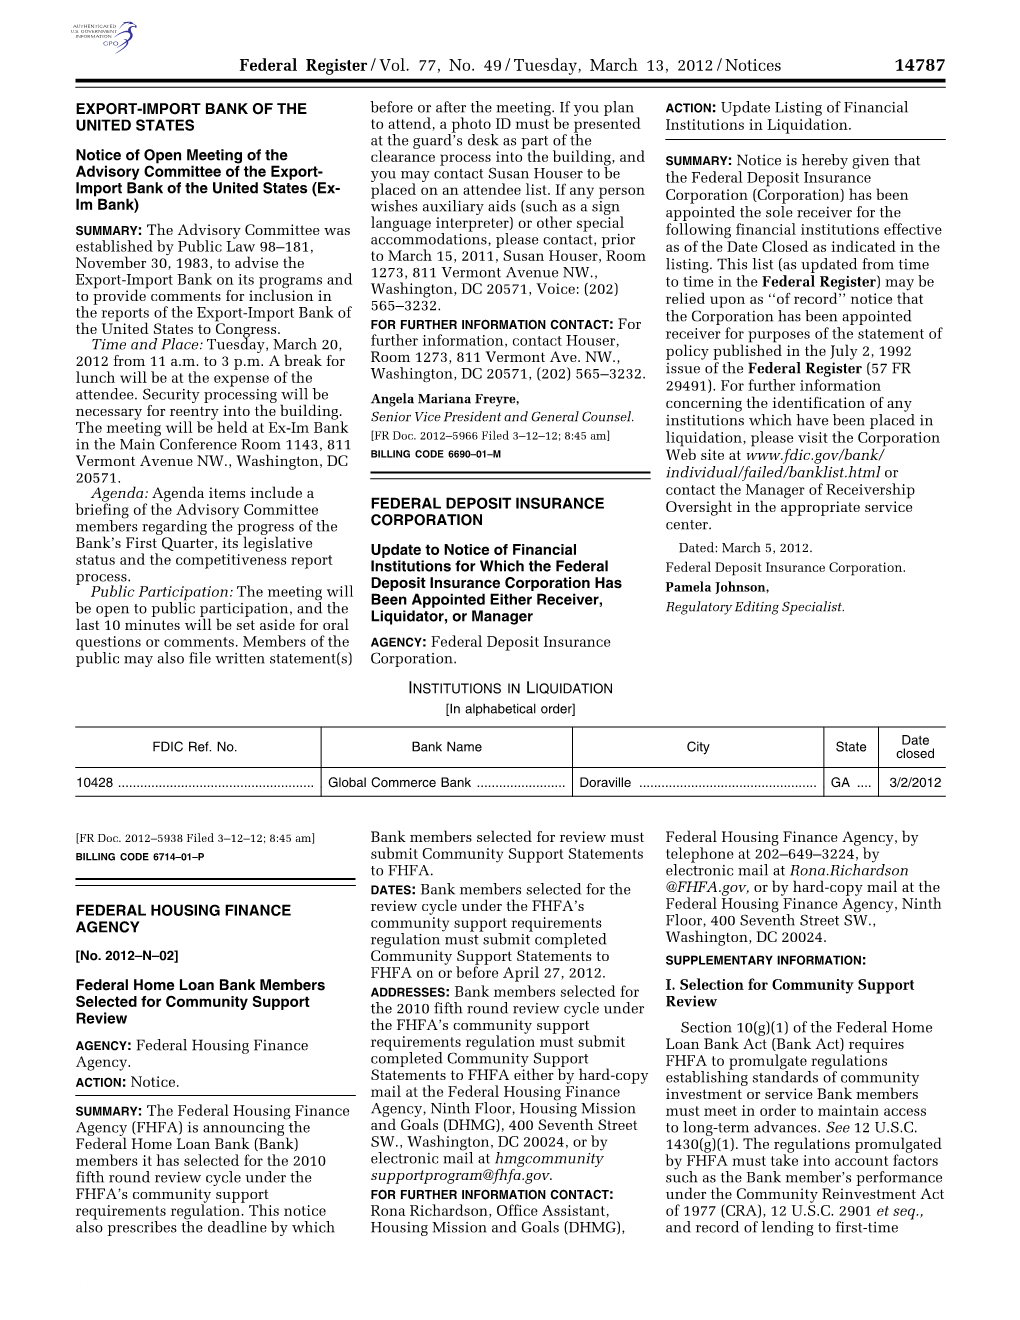 Federal Register/Vol. 77, No. 49/Tuesday, March 13, 2012/Notices